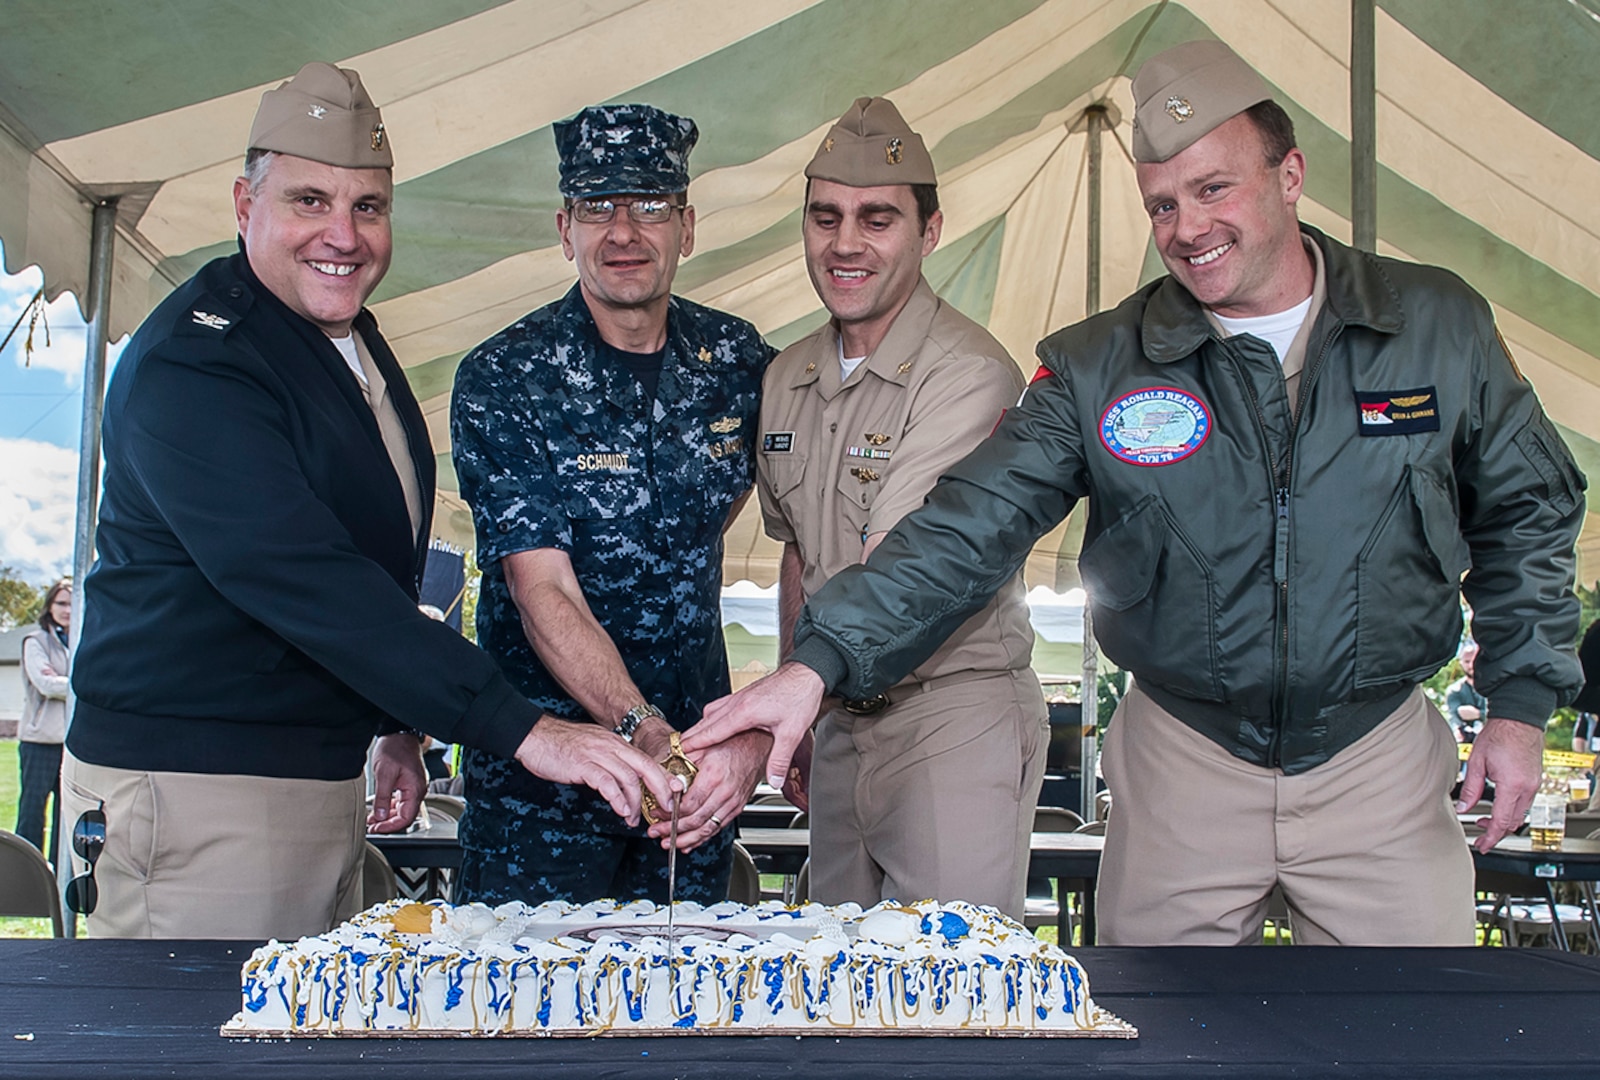 (From left) Navy Capt. Justin DeBord, Navy Capt. Jeffrey Schmidt, Lt. Cmdr. Michael Sargent, and Navy Capt. Brian Ginnane slice the cake at the Navy's 241st birthday celebration Oct. 13 at Defense Supply Center Columbus. Schmidt and Sargent represented the oldest and youngest, respectively, sailors in attendance.